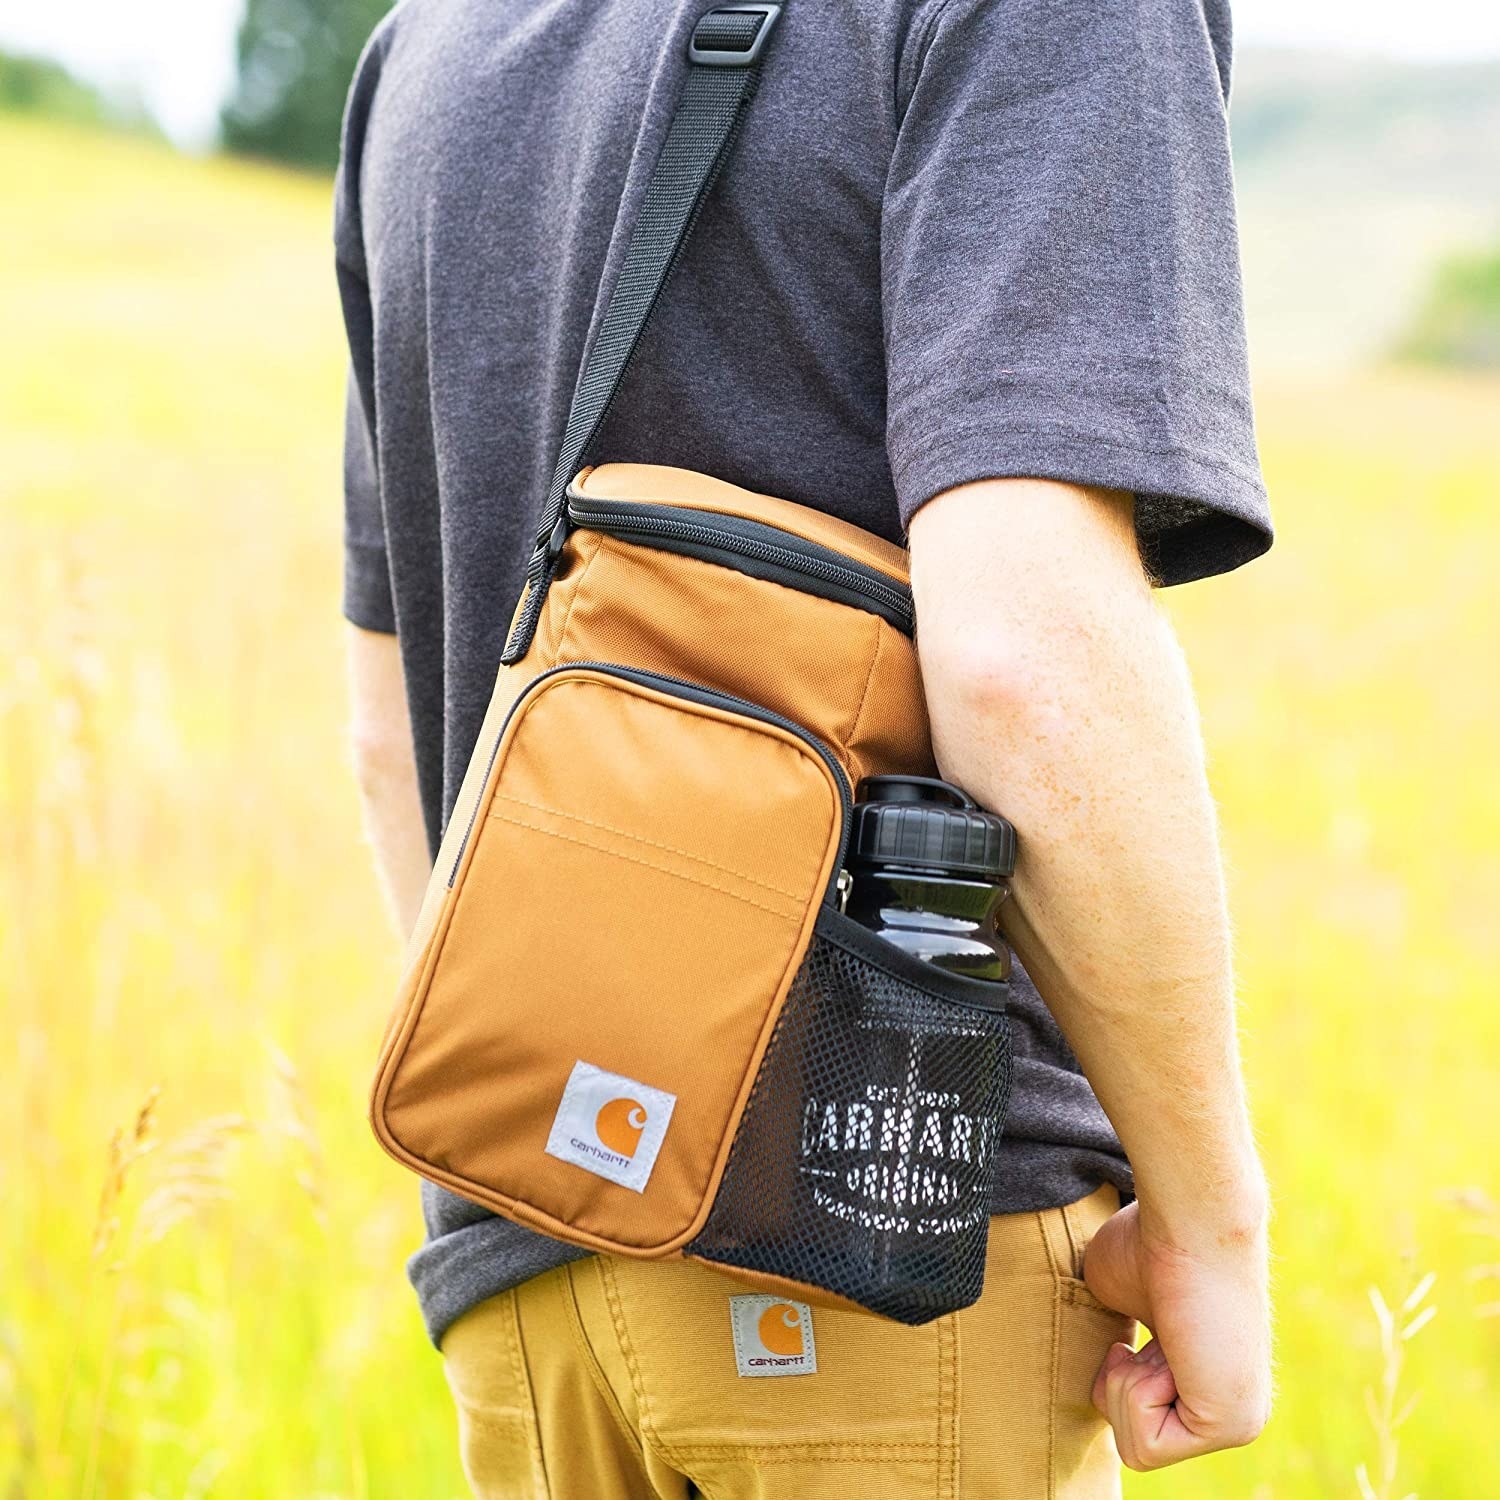 A person wearing the lunch bag in a field